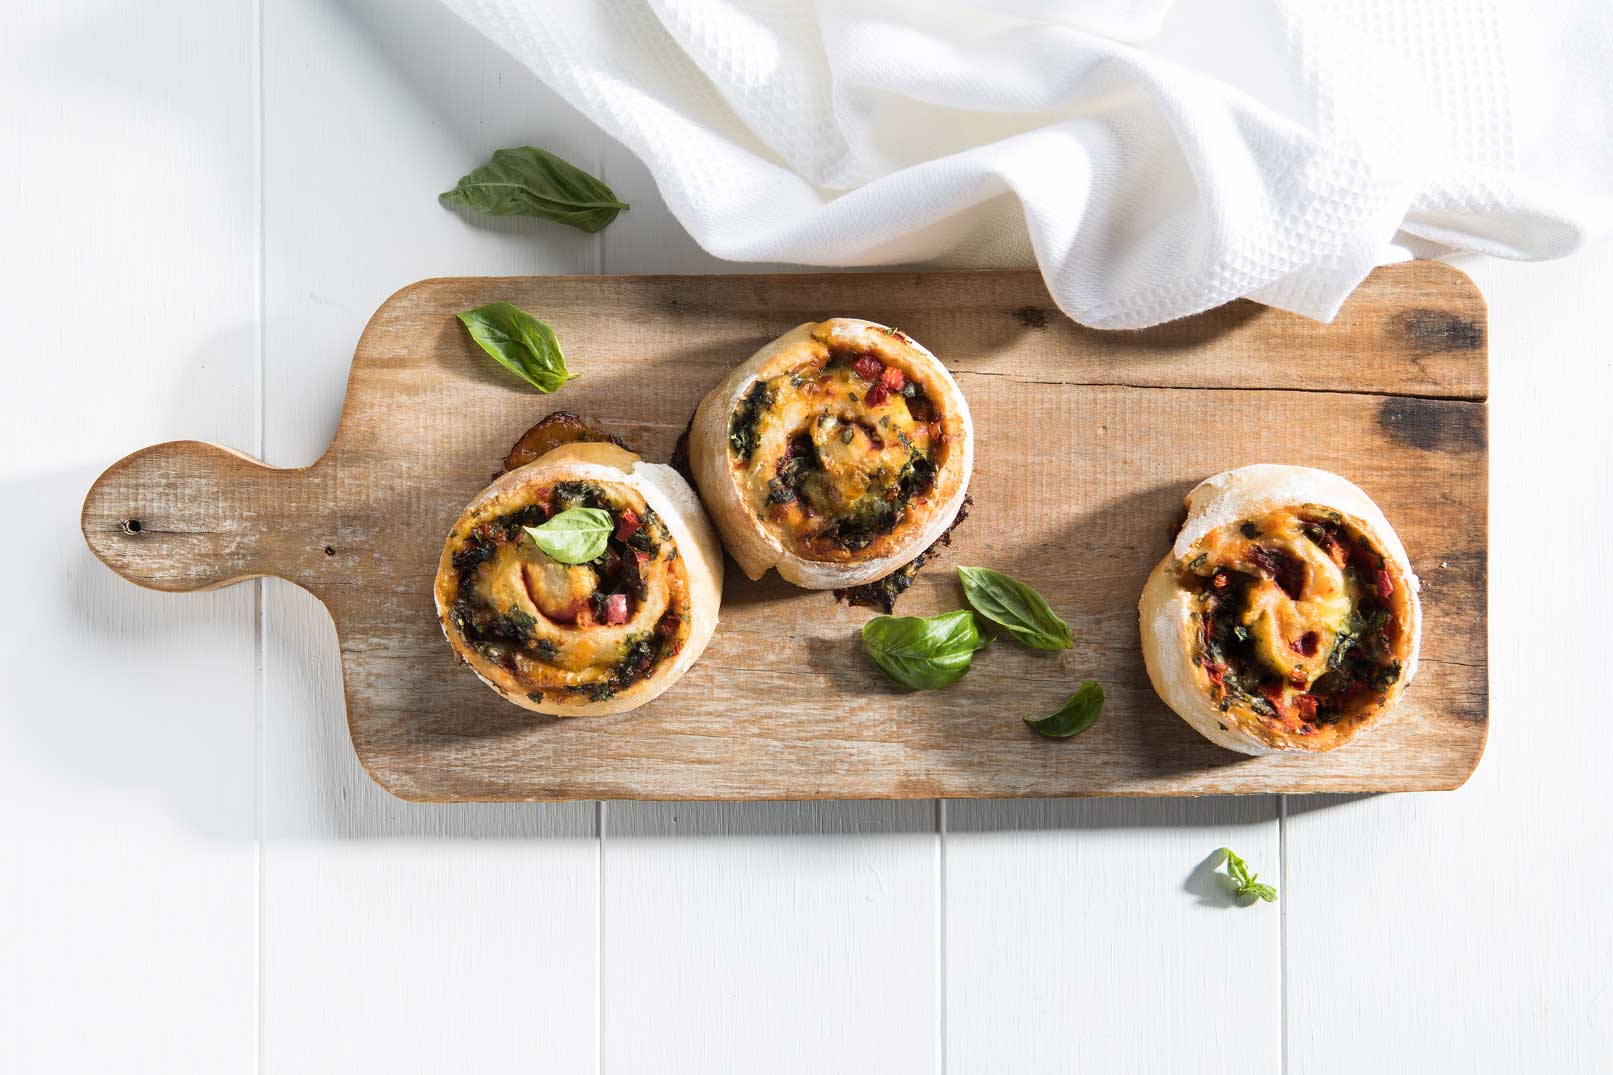 Image of three baked Mediterranean scrolls shot from above, sprinkled with basil leaves on a wooden serving board.